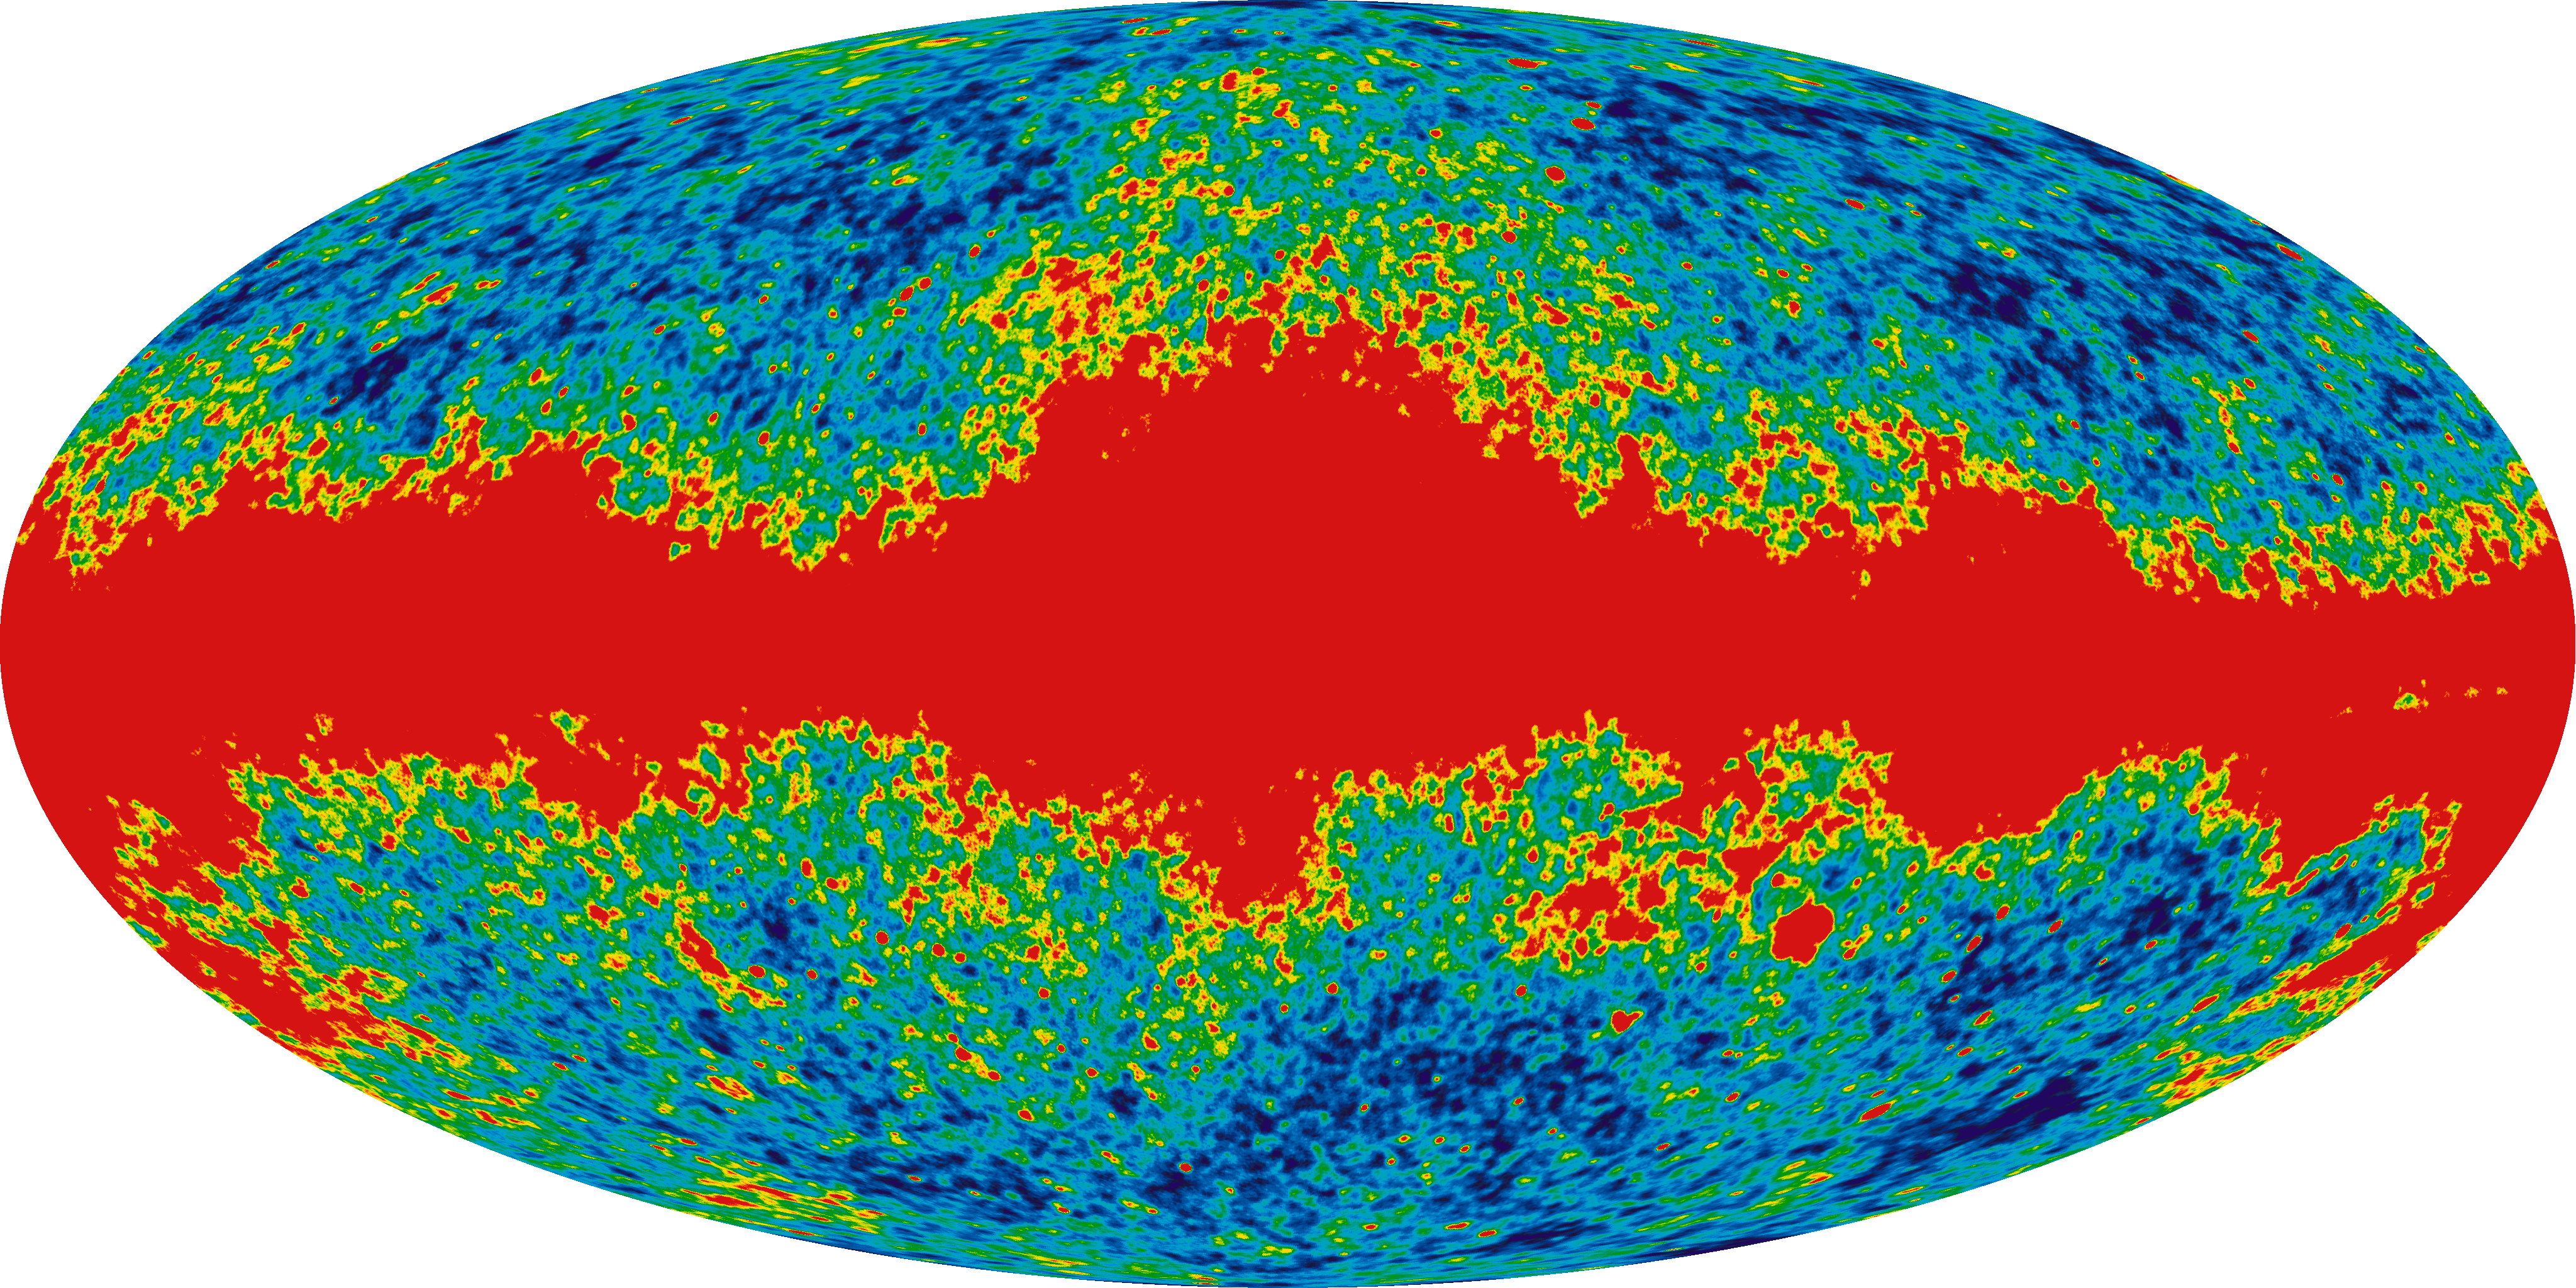 Image: The images below represent full-sky maps of the cosmic microwave background anisotropy and foreground signal from our galaxy (in red).